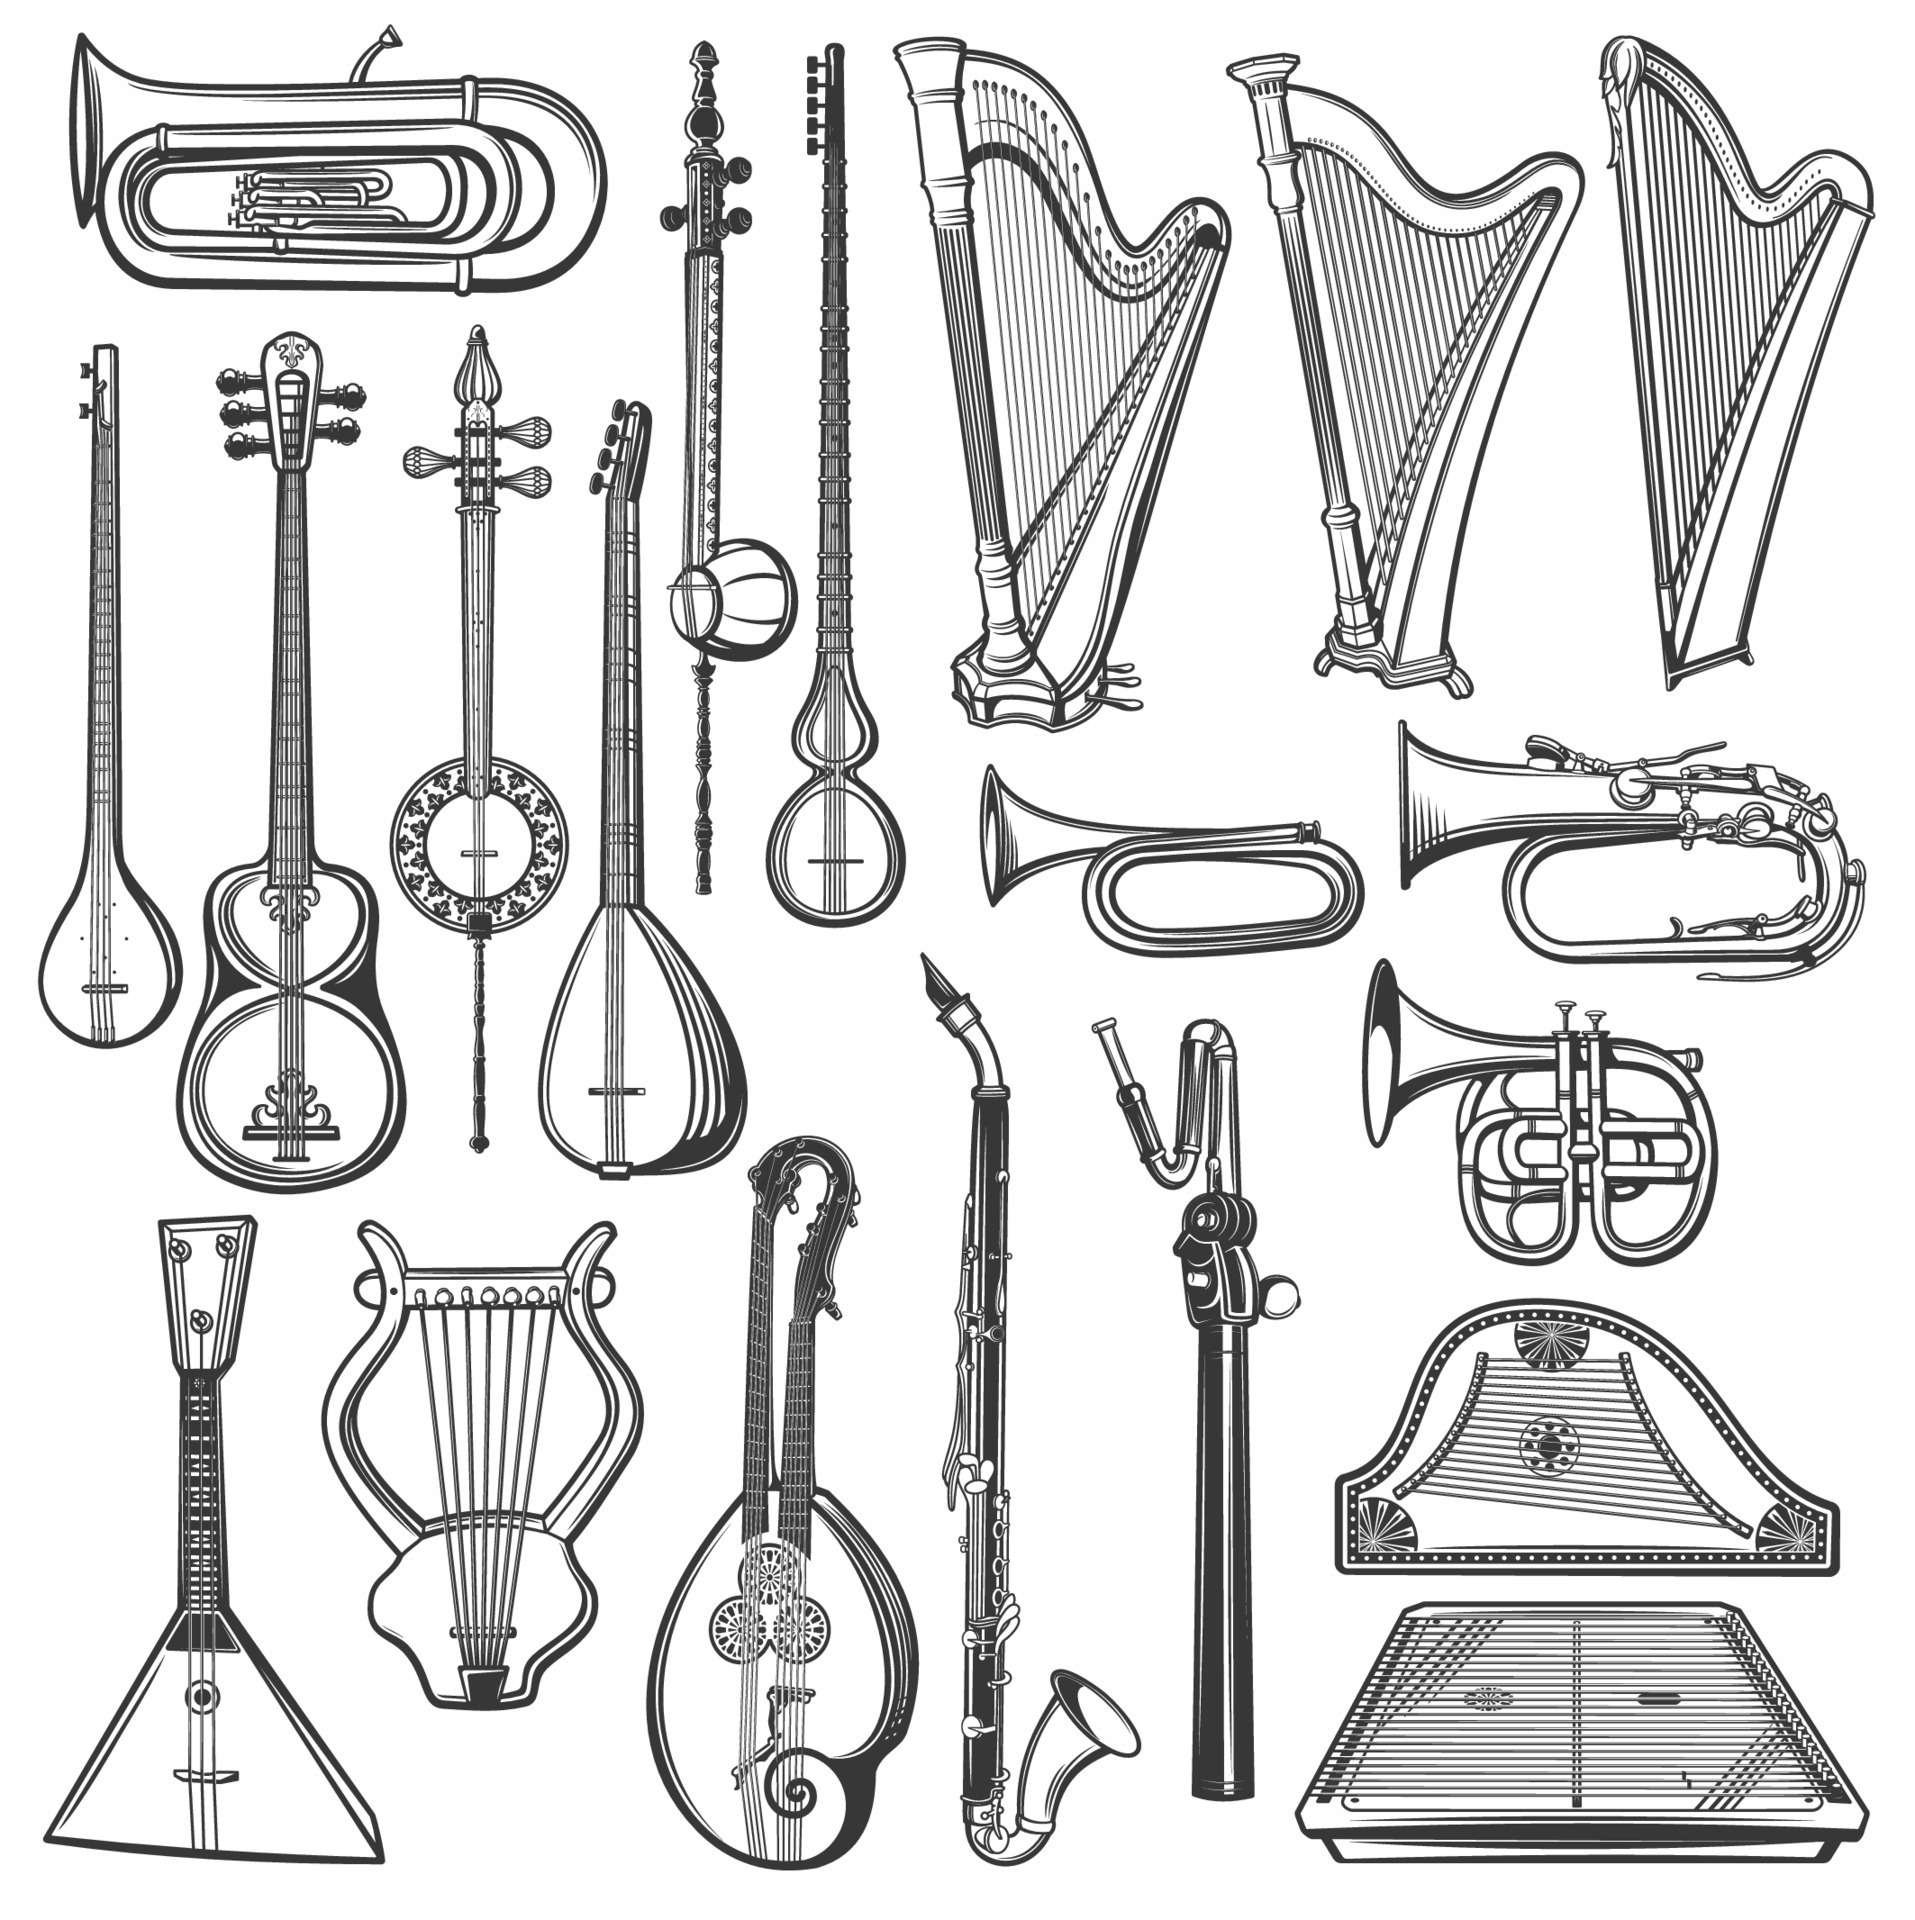 Musical instruments drawing Part 1 - YouTube-saigonsouth.com.vn